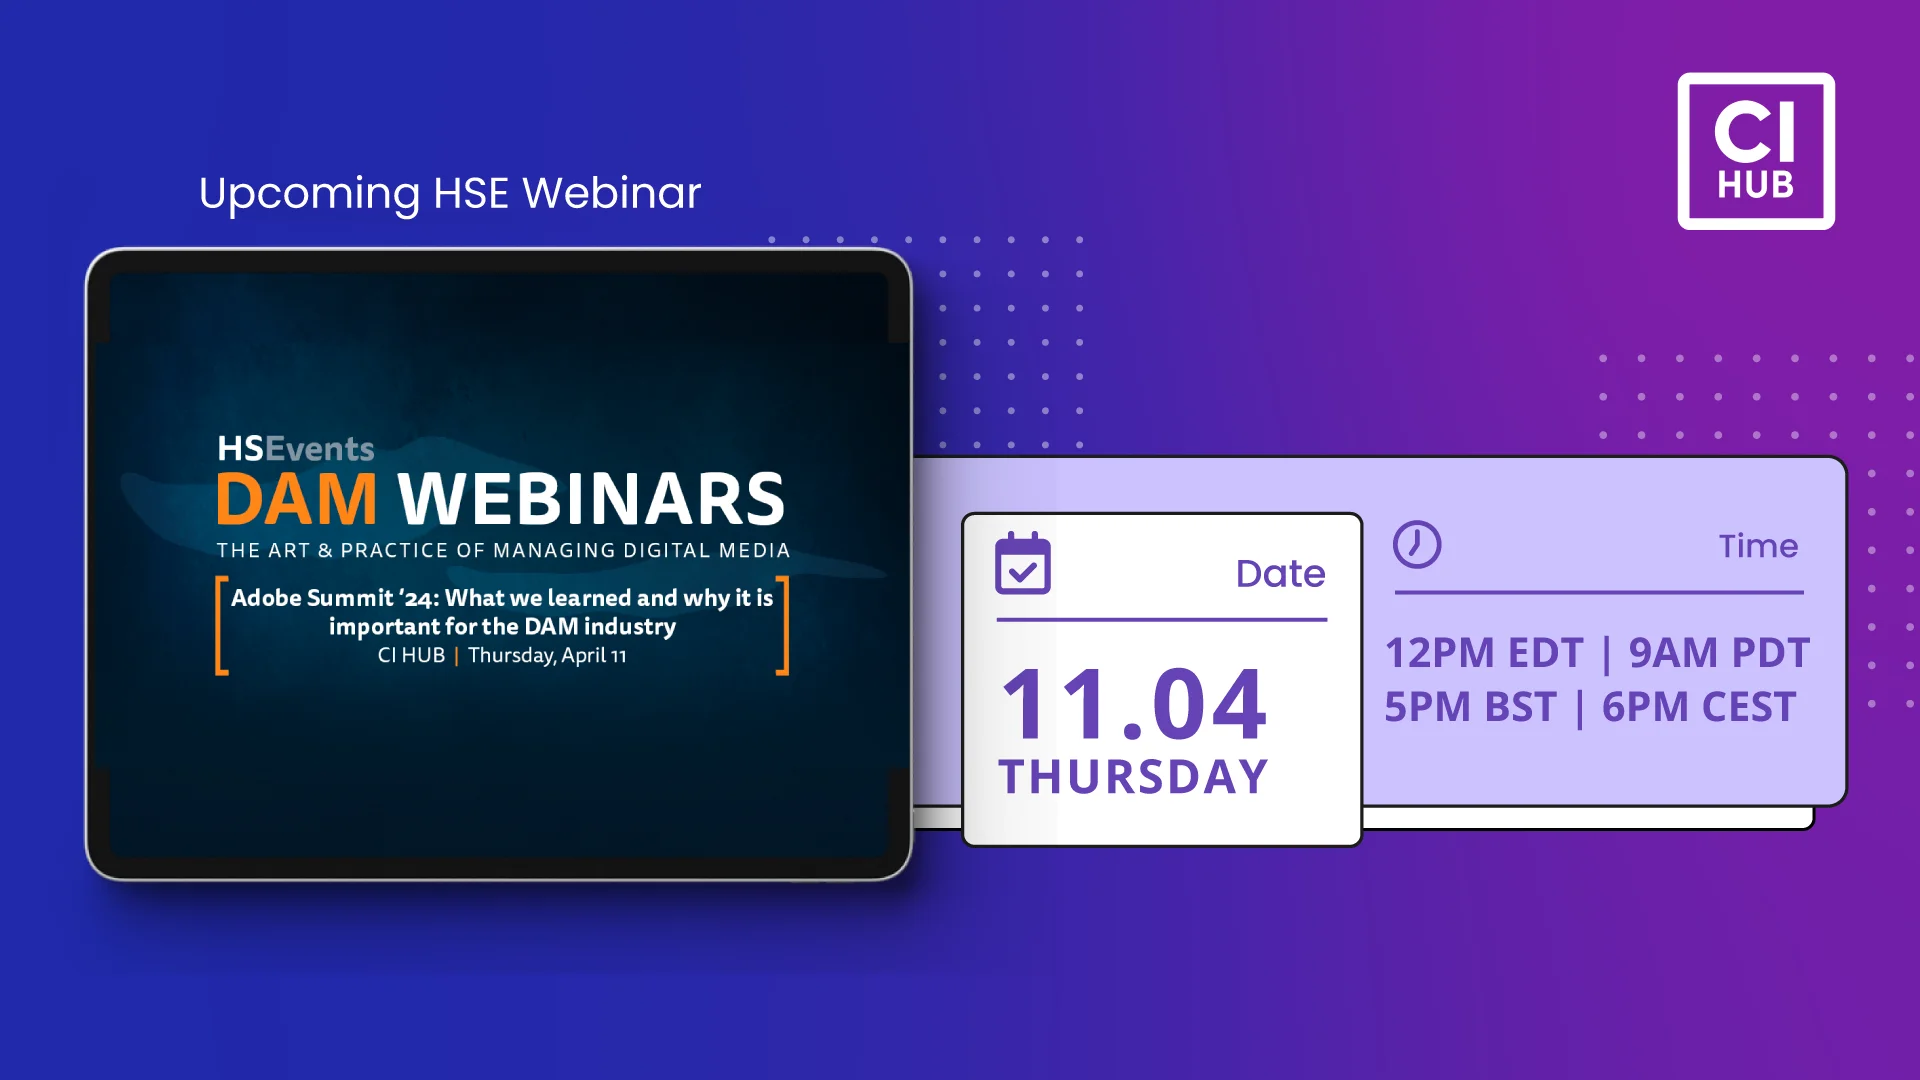 HSE Webinar - Adobe Summit 24, what we learned and why it is important banner image